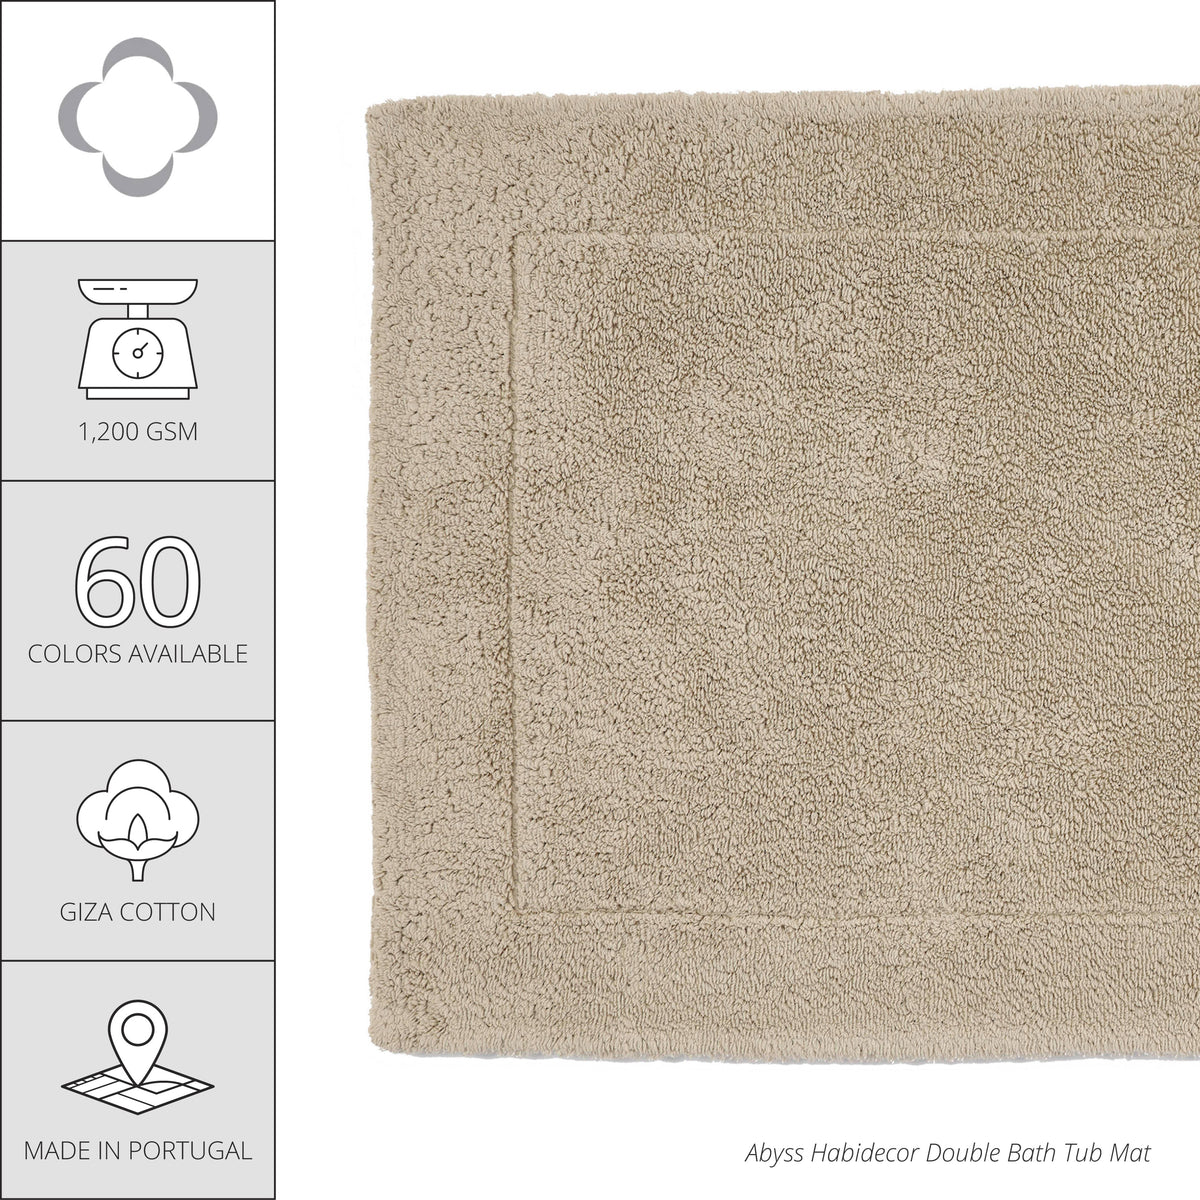 Abyss Double Bath Tub Mat - Gold (840)